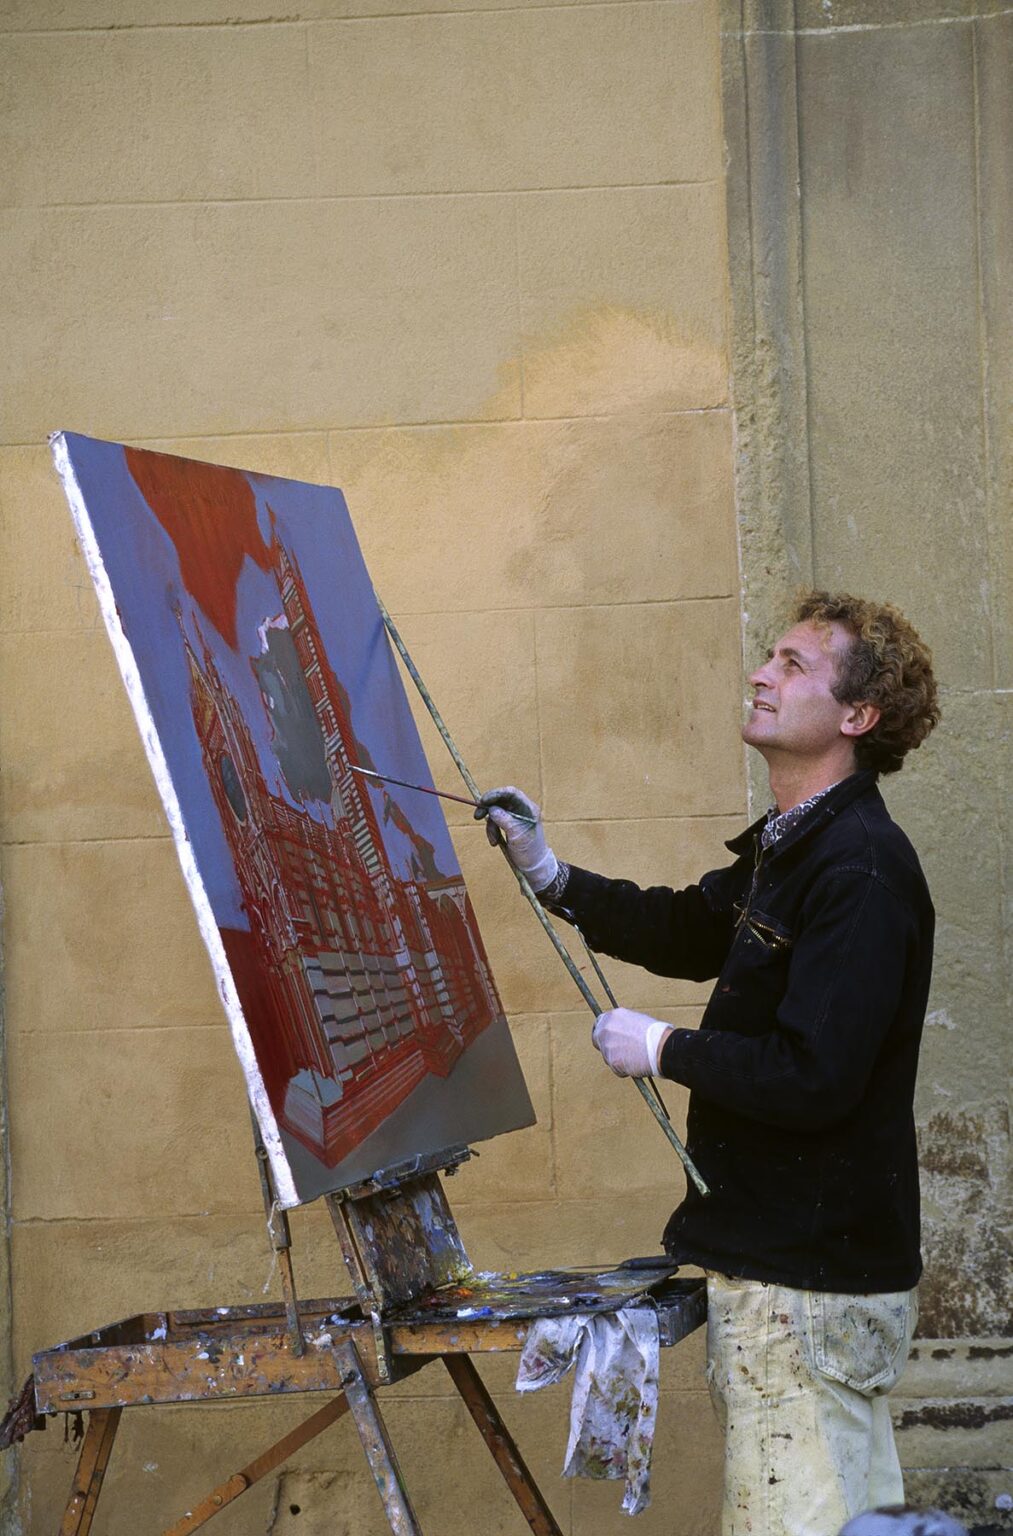 Artist paints SIENA'S CATHEDRAL, the first of the TUSCAN GOTHIC Churches begun in 1196 AD, ITALY